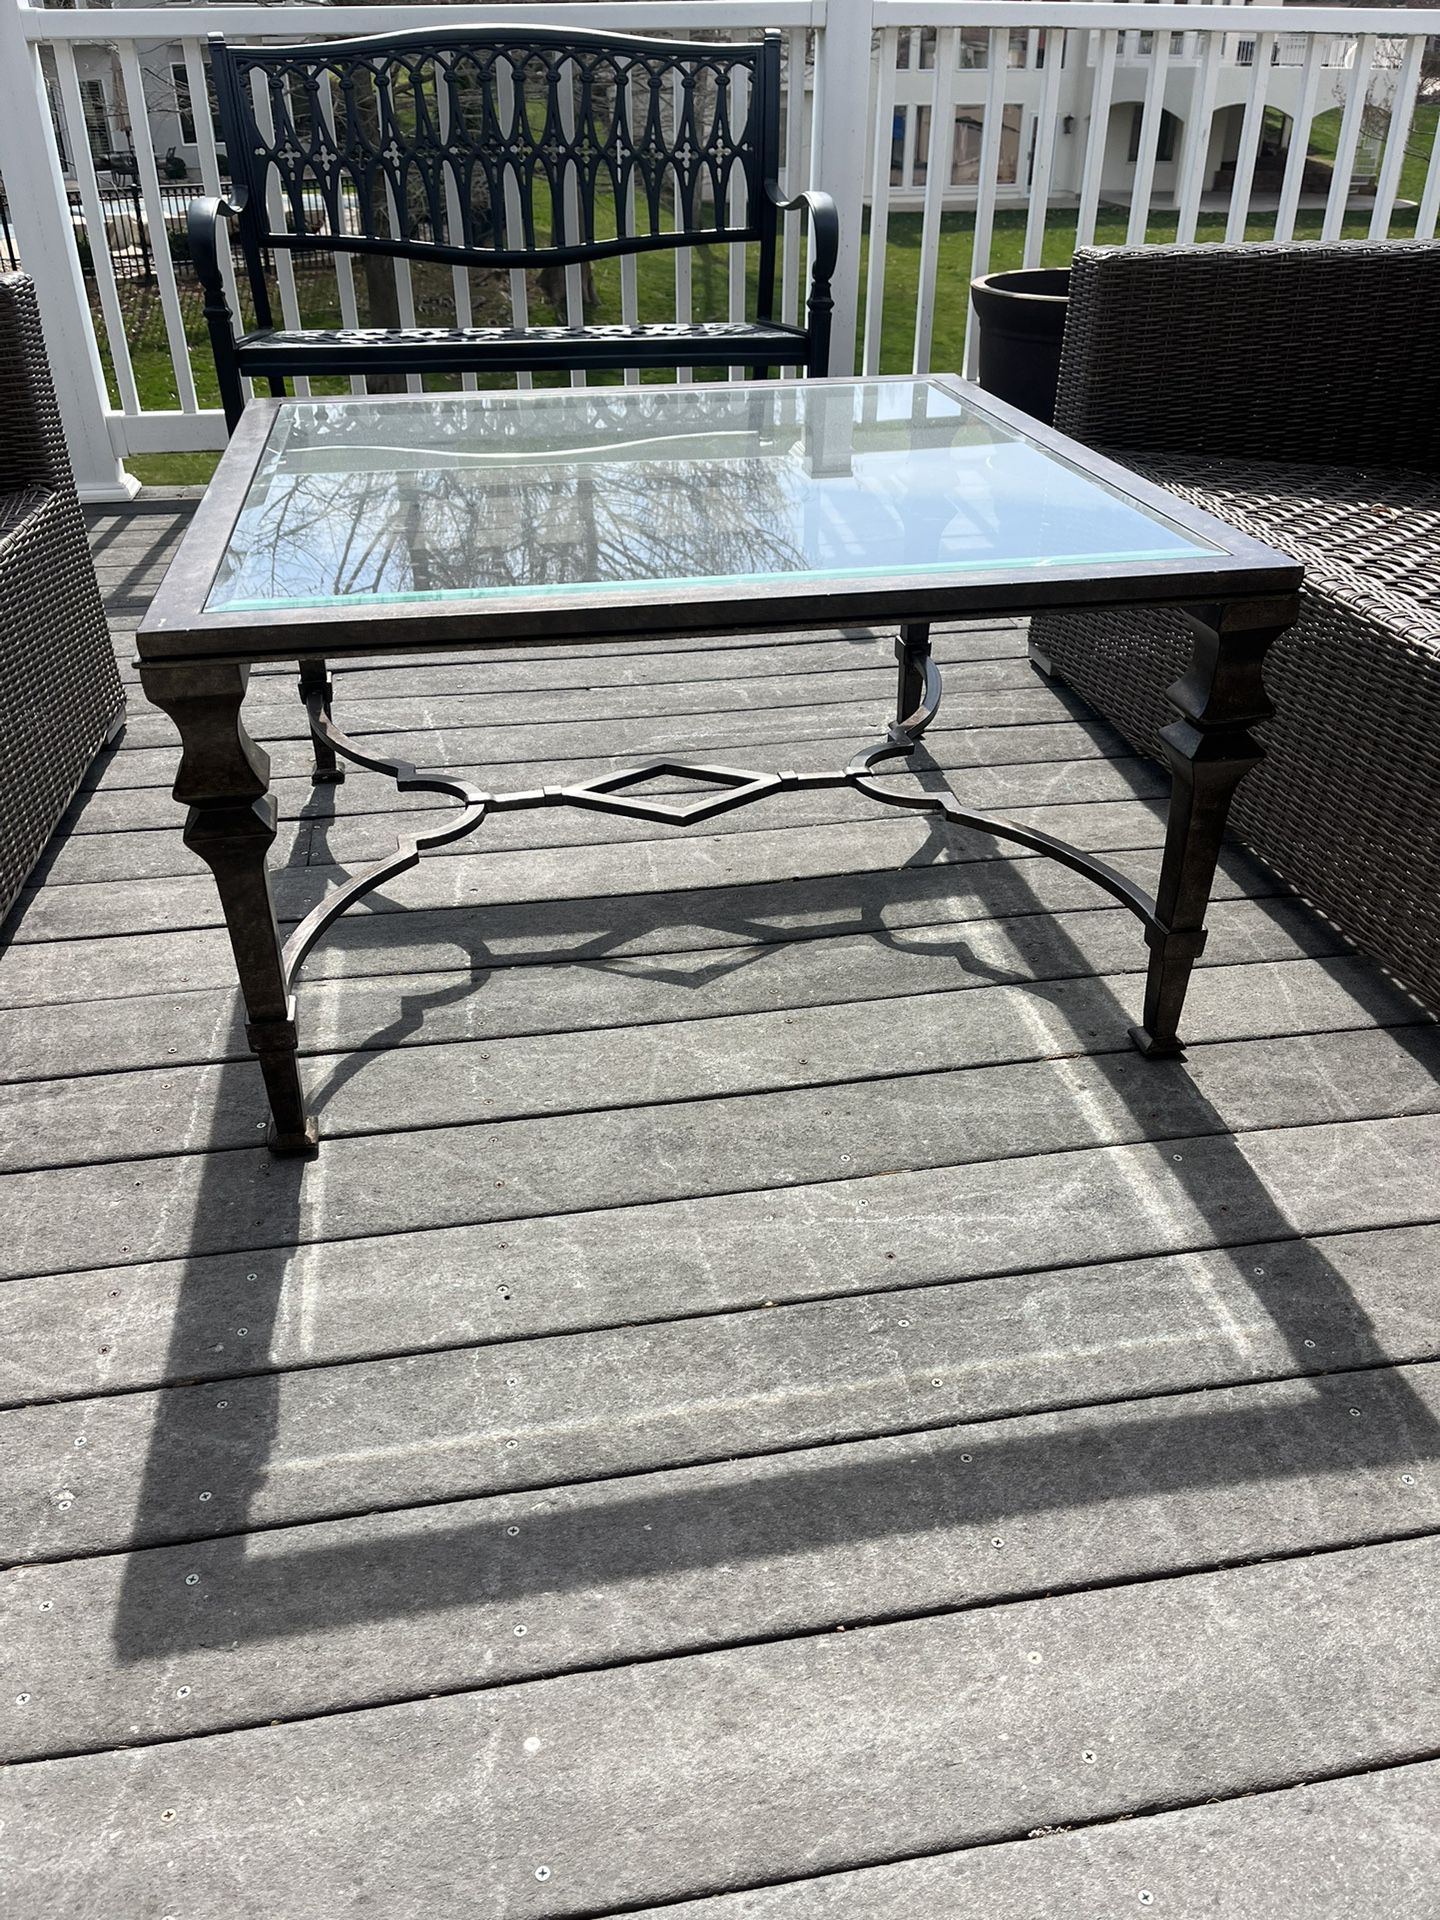 Nice Metal & Glass Coffee Table -Indoor or Outdoor Use